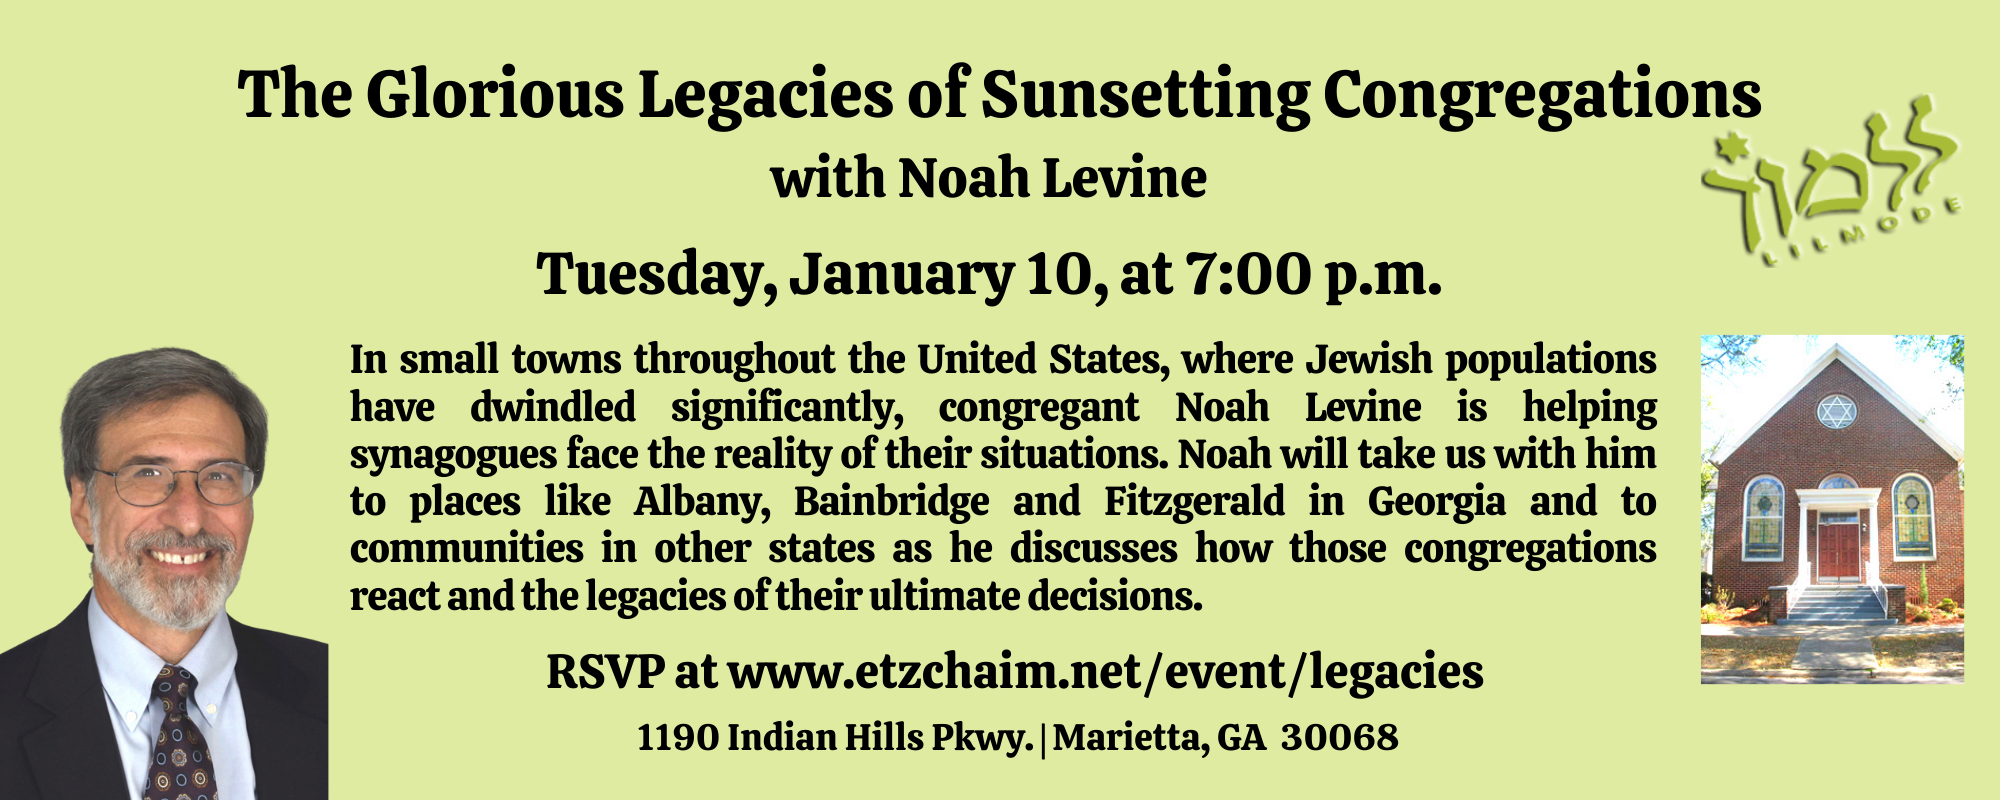 The Glorious Legacies of Sunsetting Congregations with Noah Levine